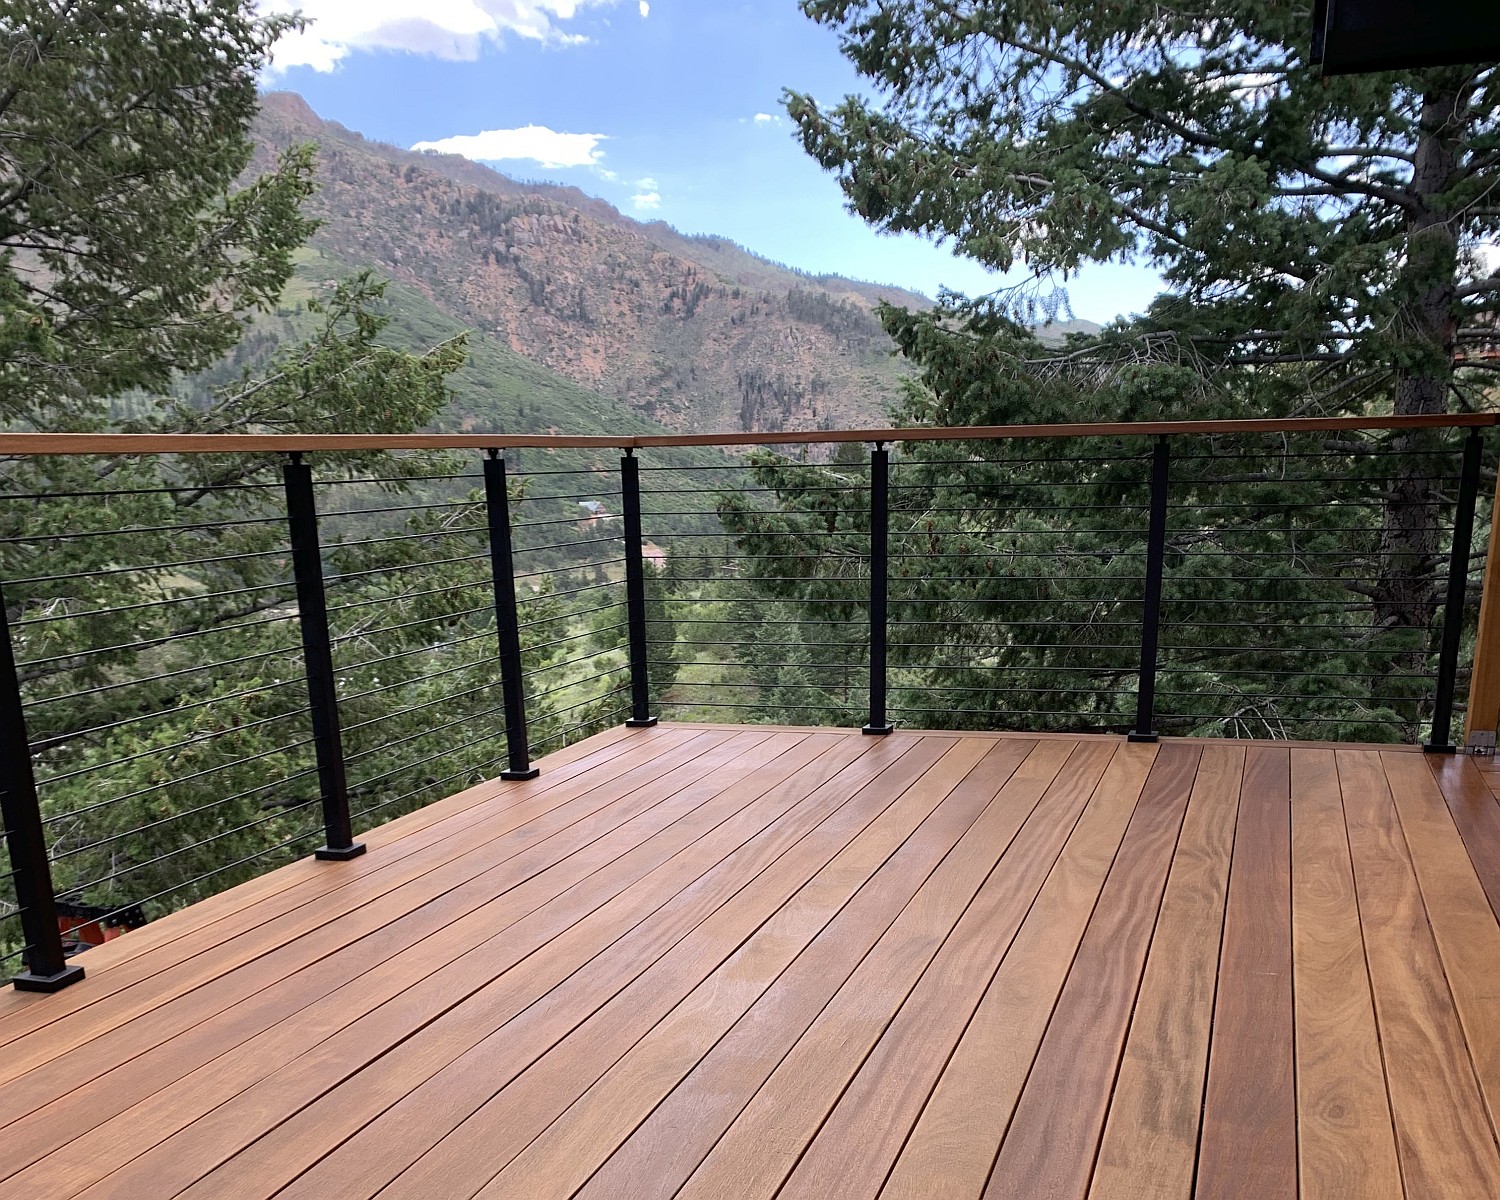 A custom designed deck built with Cumaru hardwood. It has a beautiful view of the mountains.